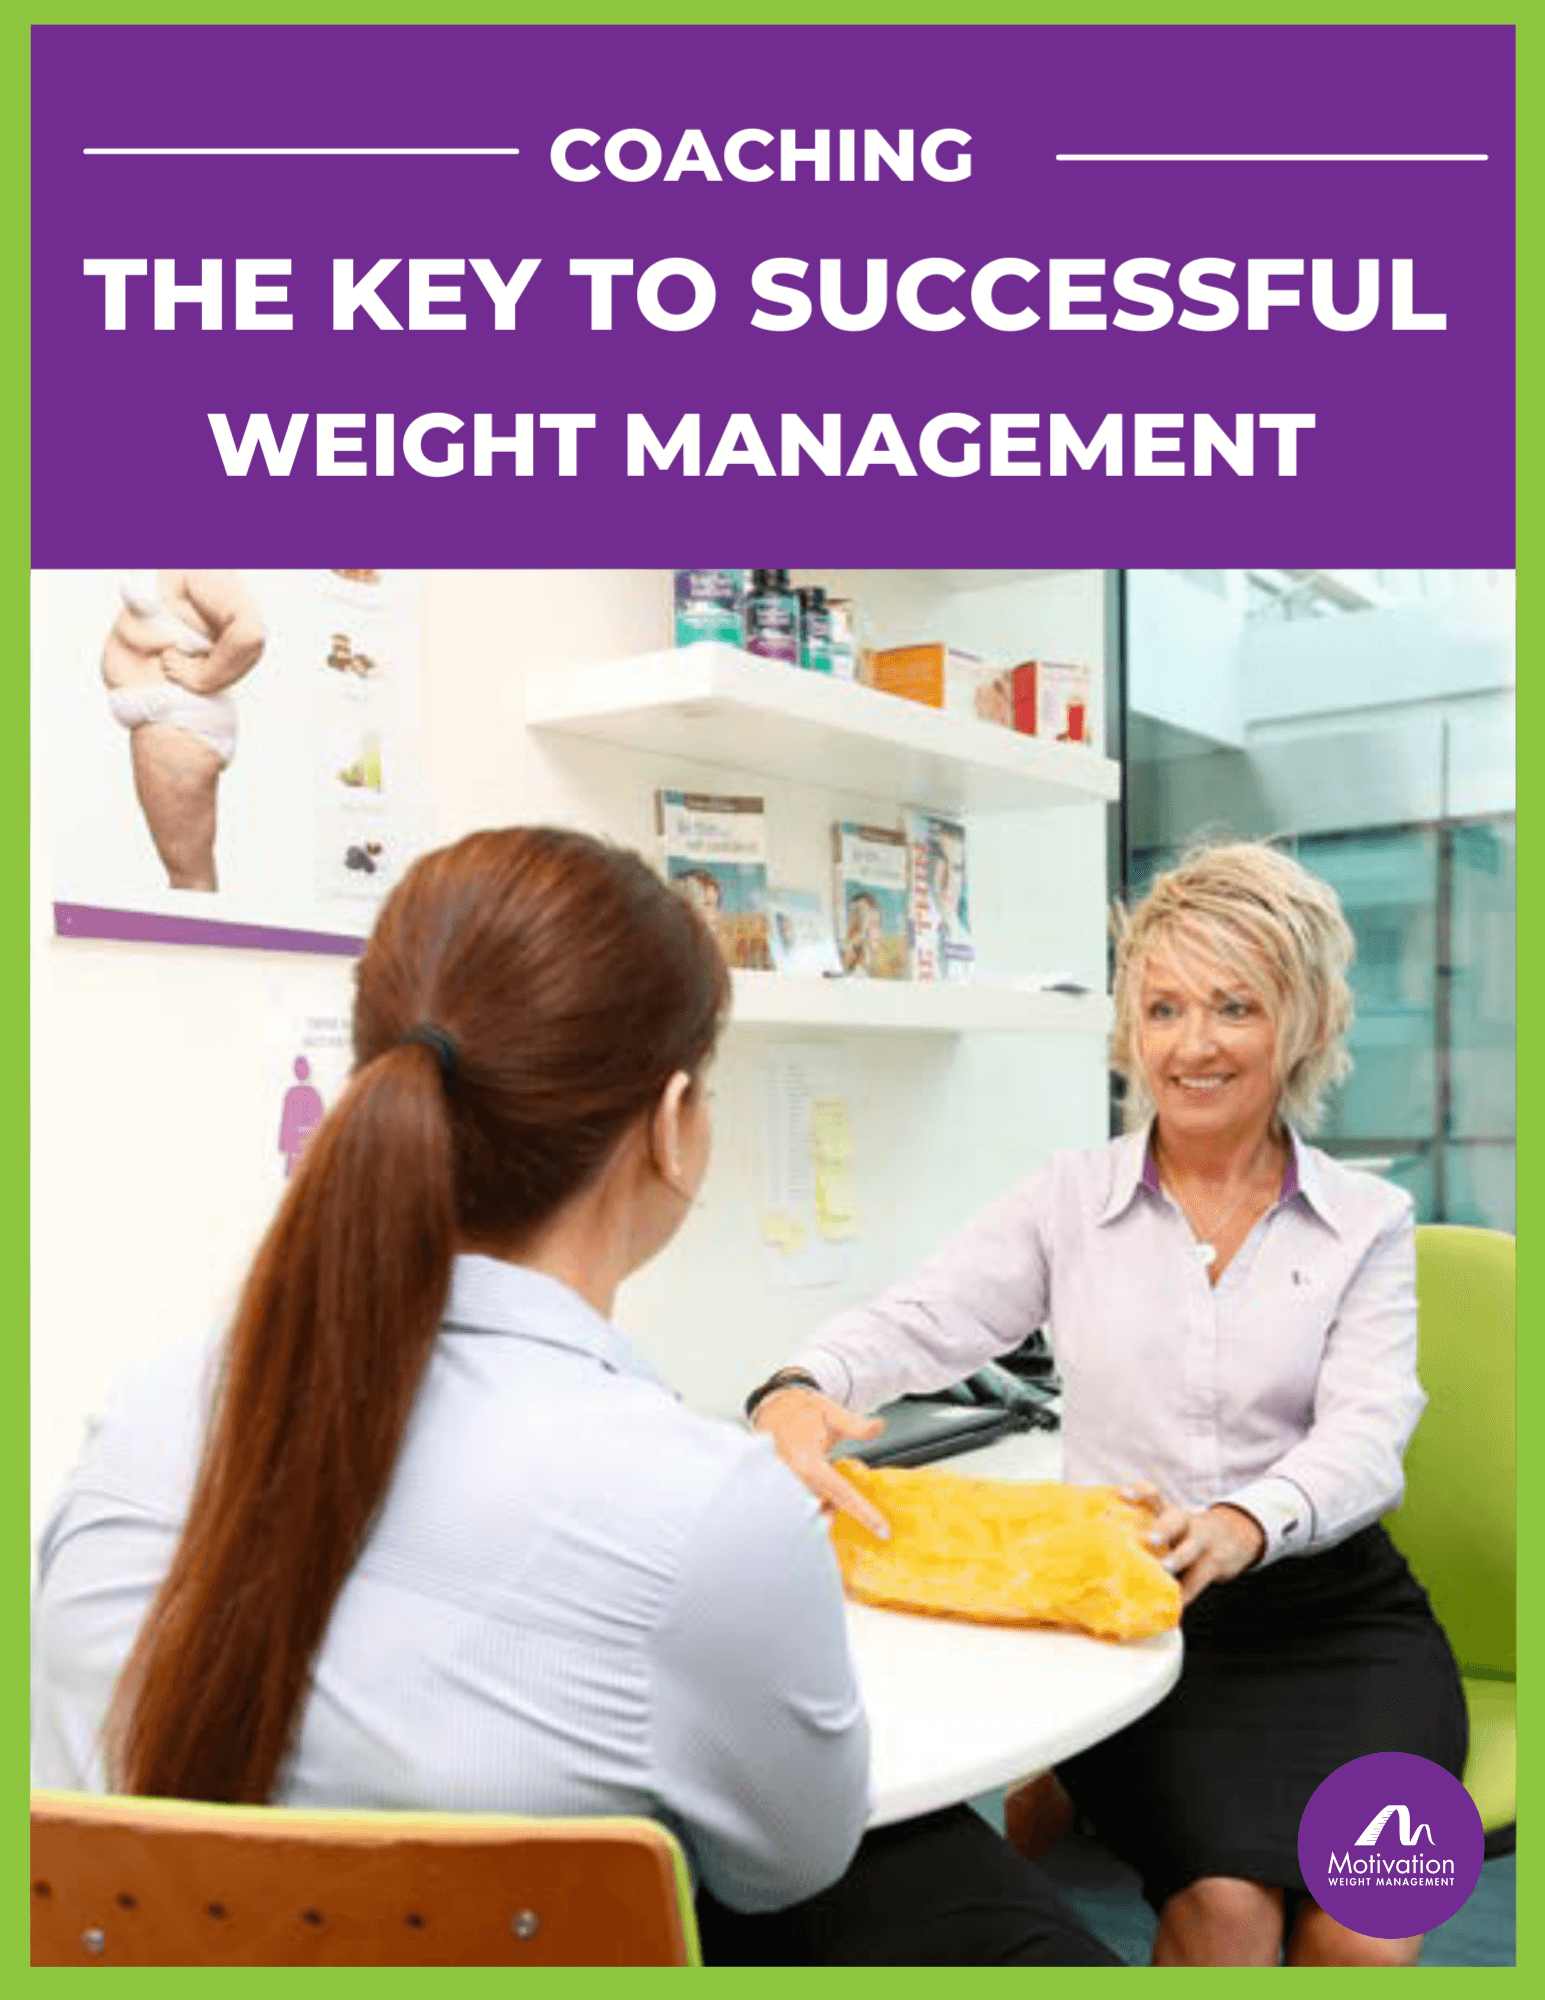 Coaching the key to successful weight management